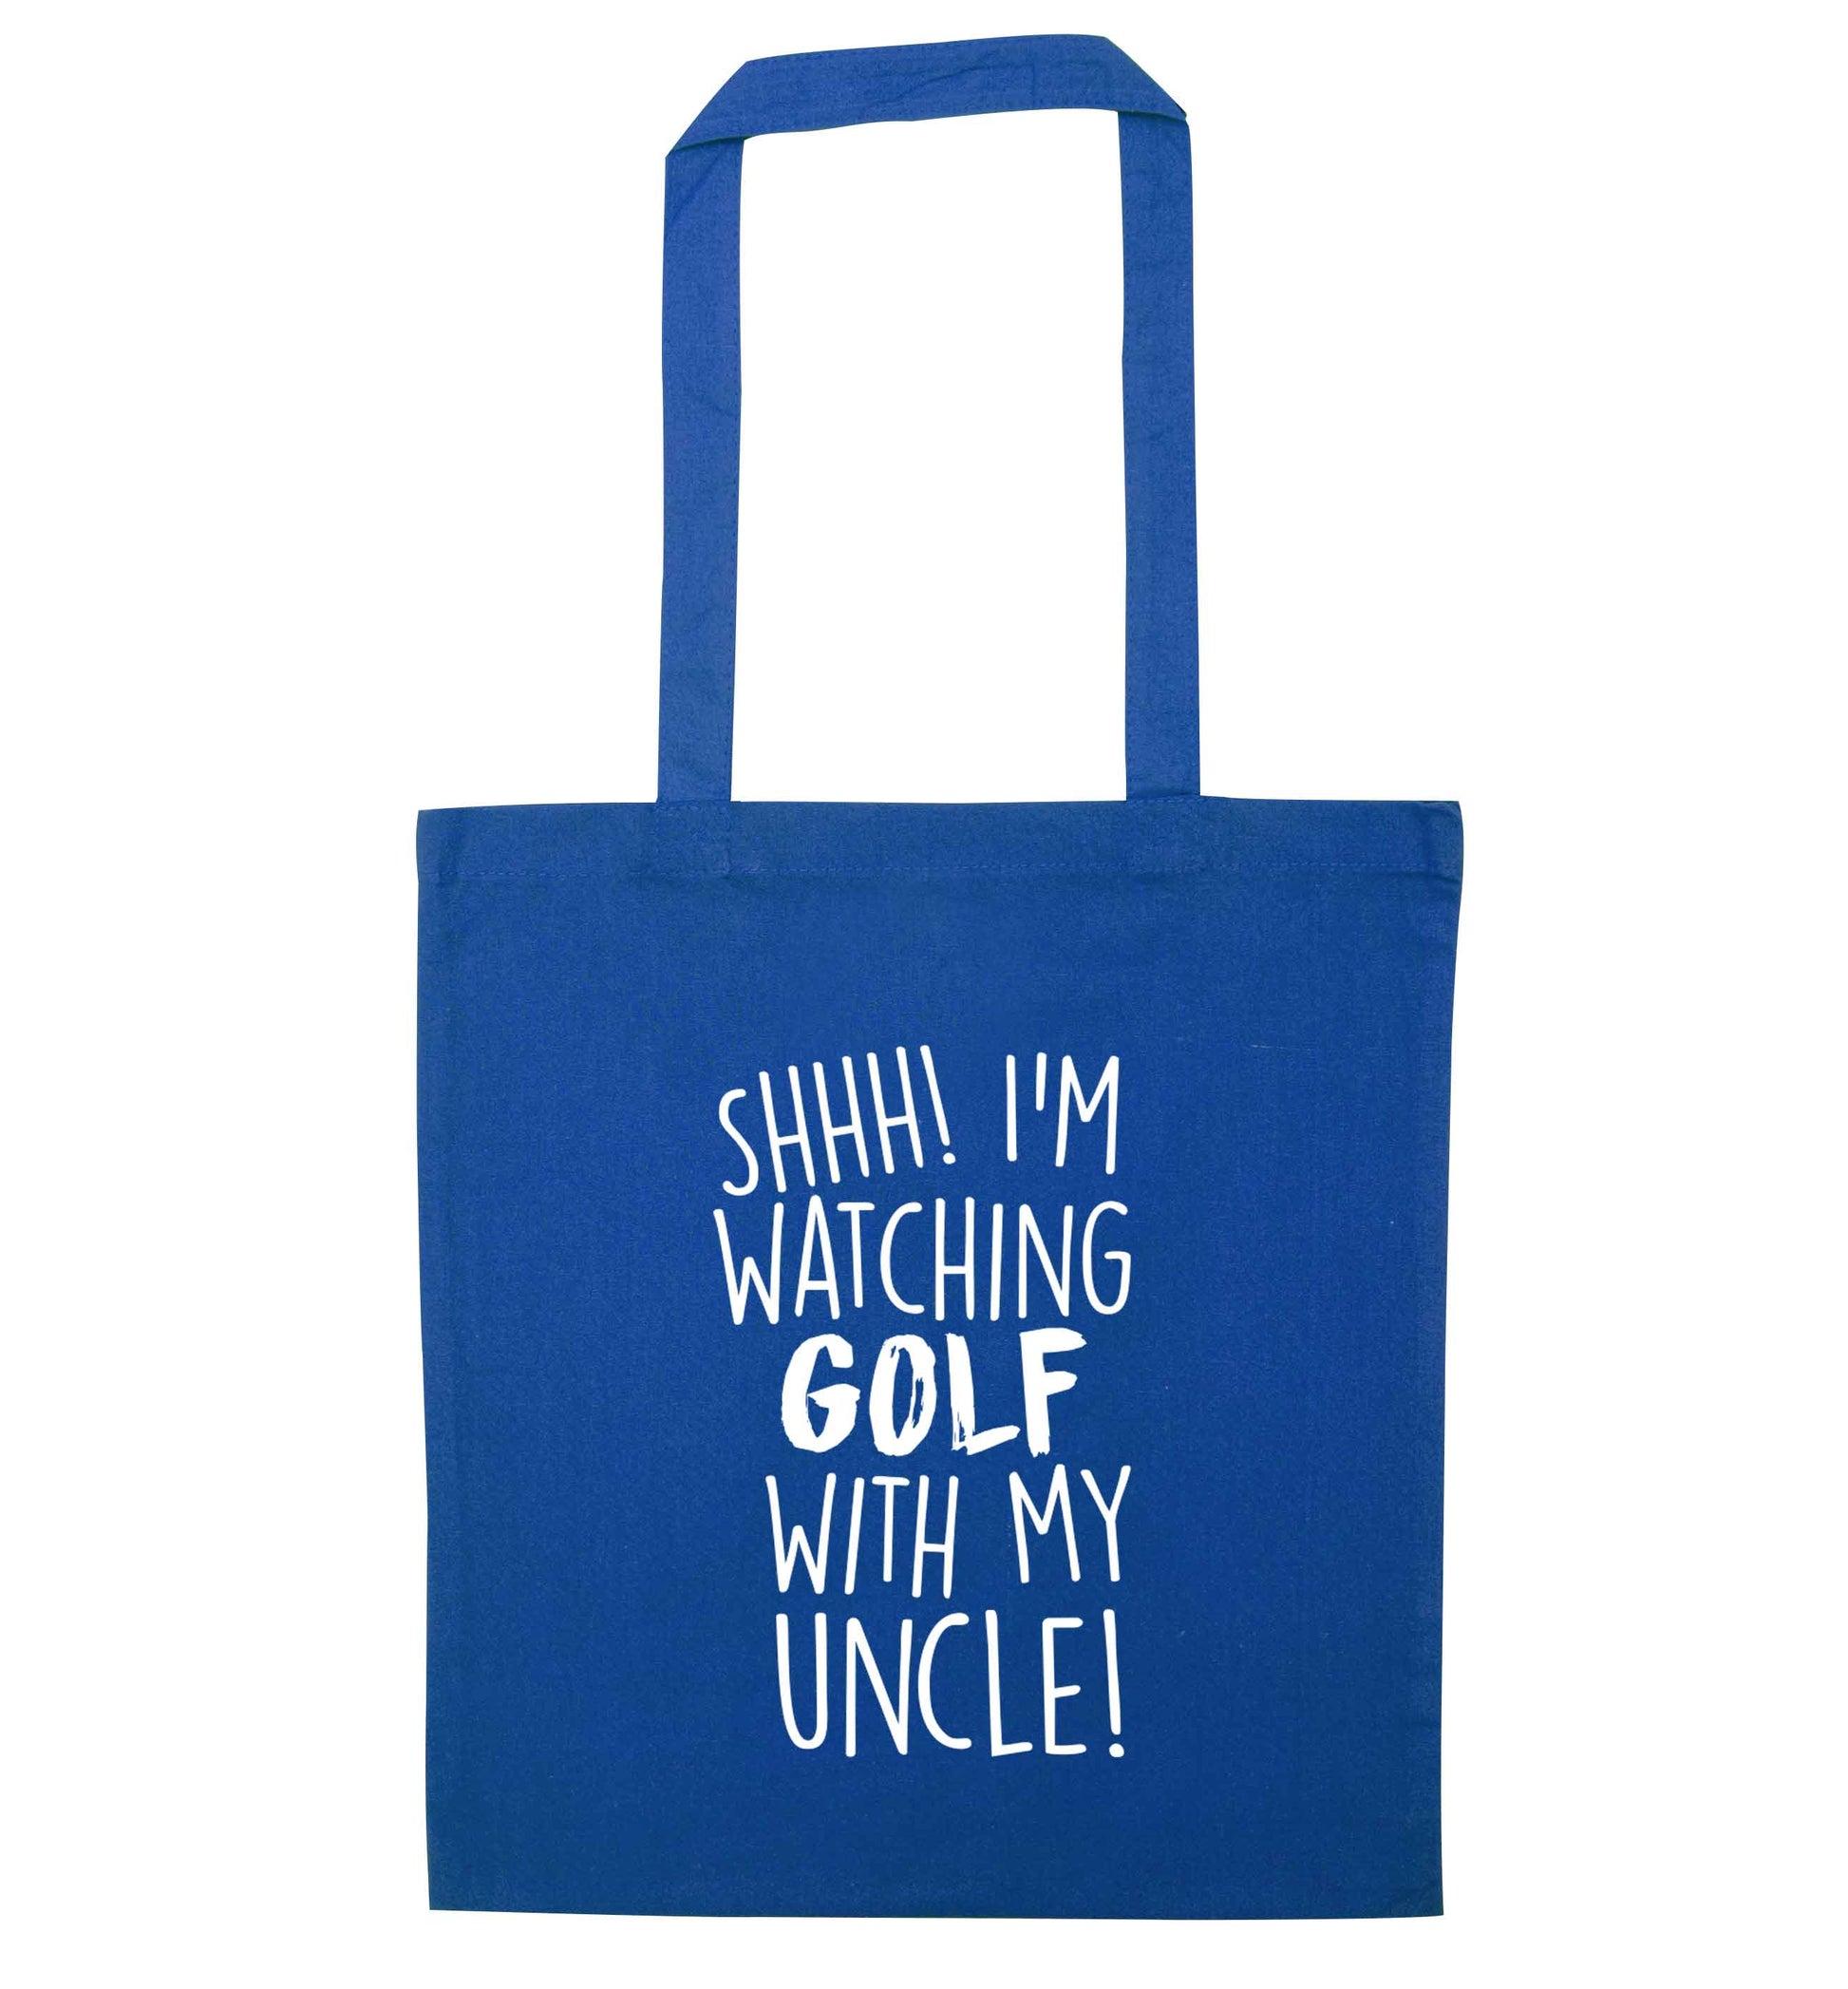 Shh I'm watching golf with my uncle blue tote bag